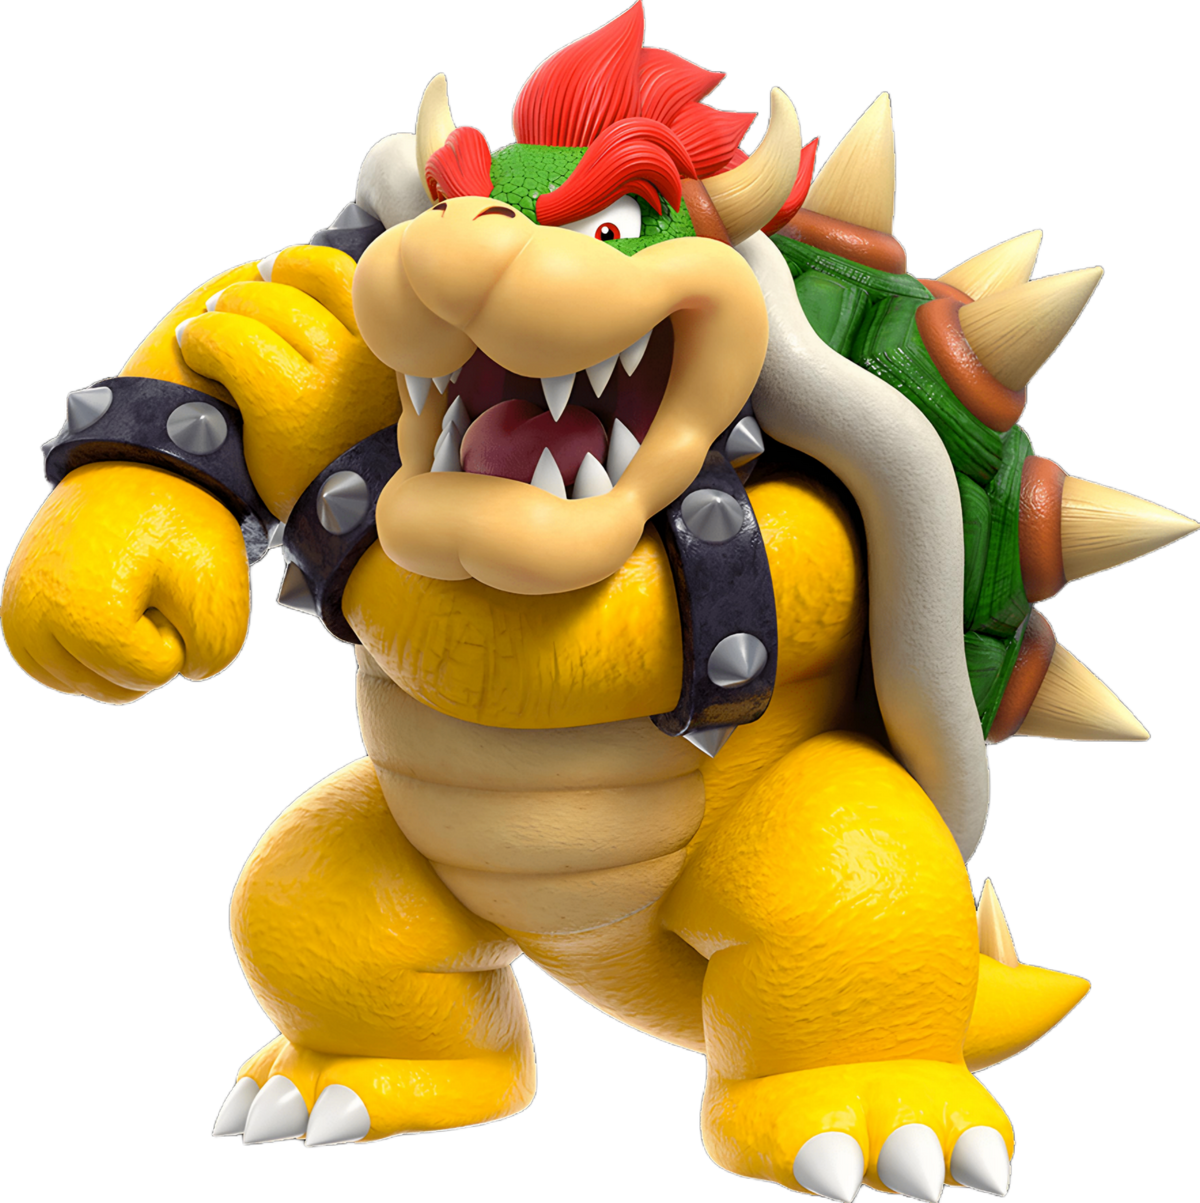 Bowser's Inside Story IMPOSSIBLE MODE [Mario & Luigi: Bowser's Inside  Story] [Mods]